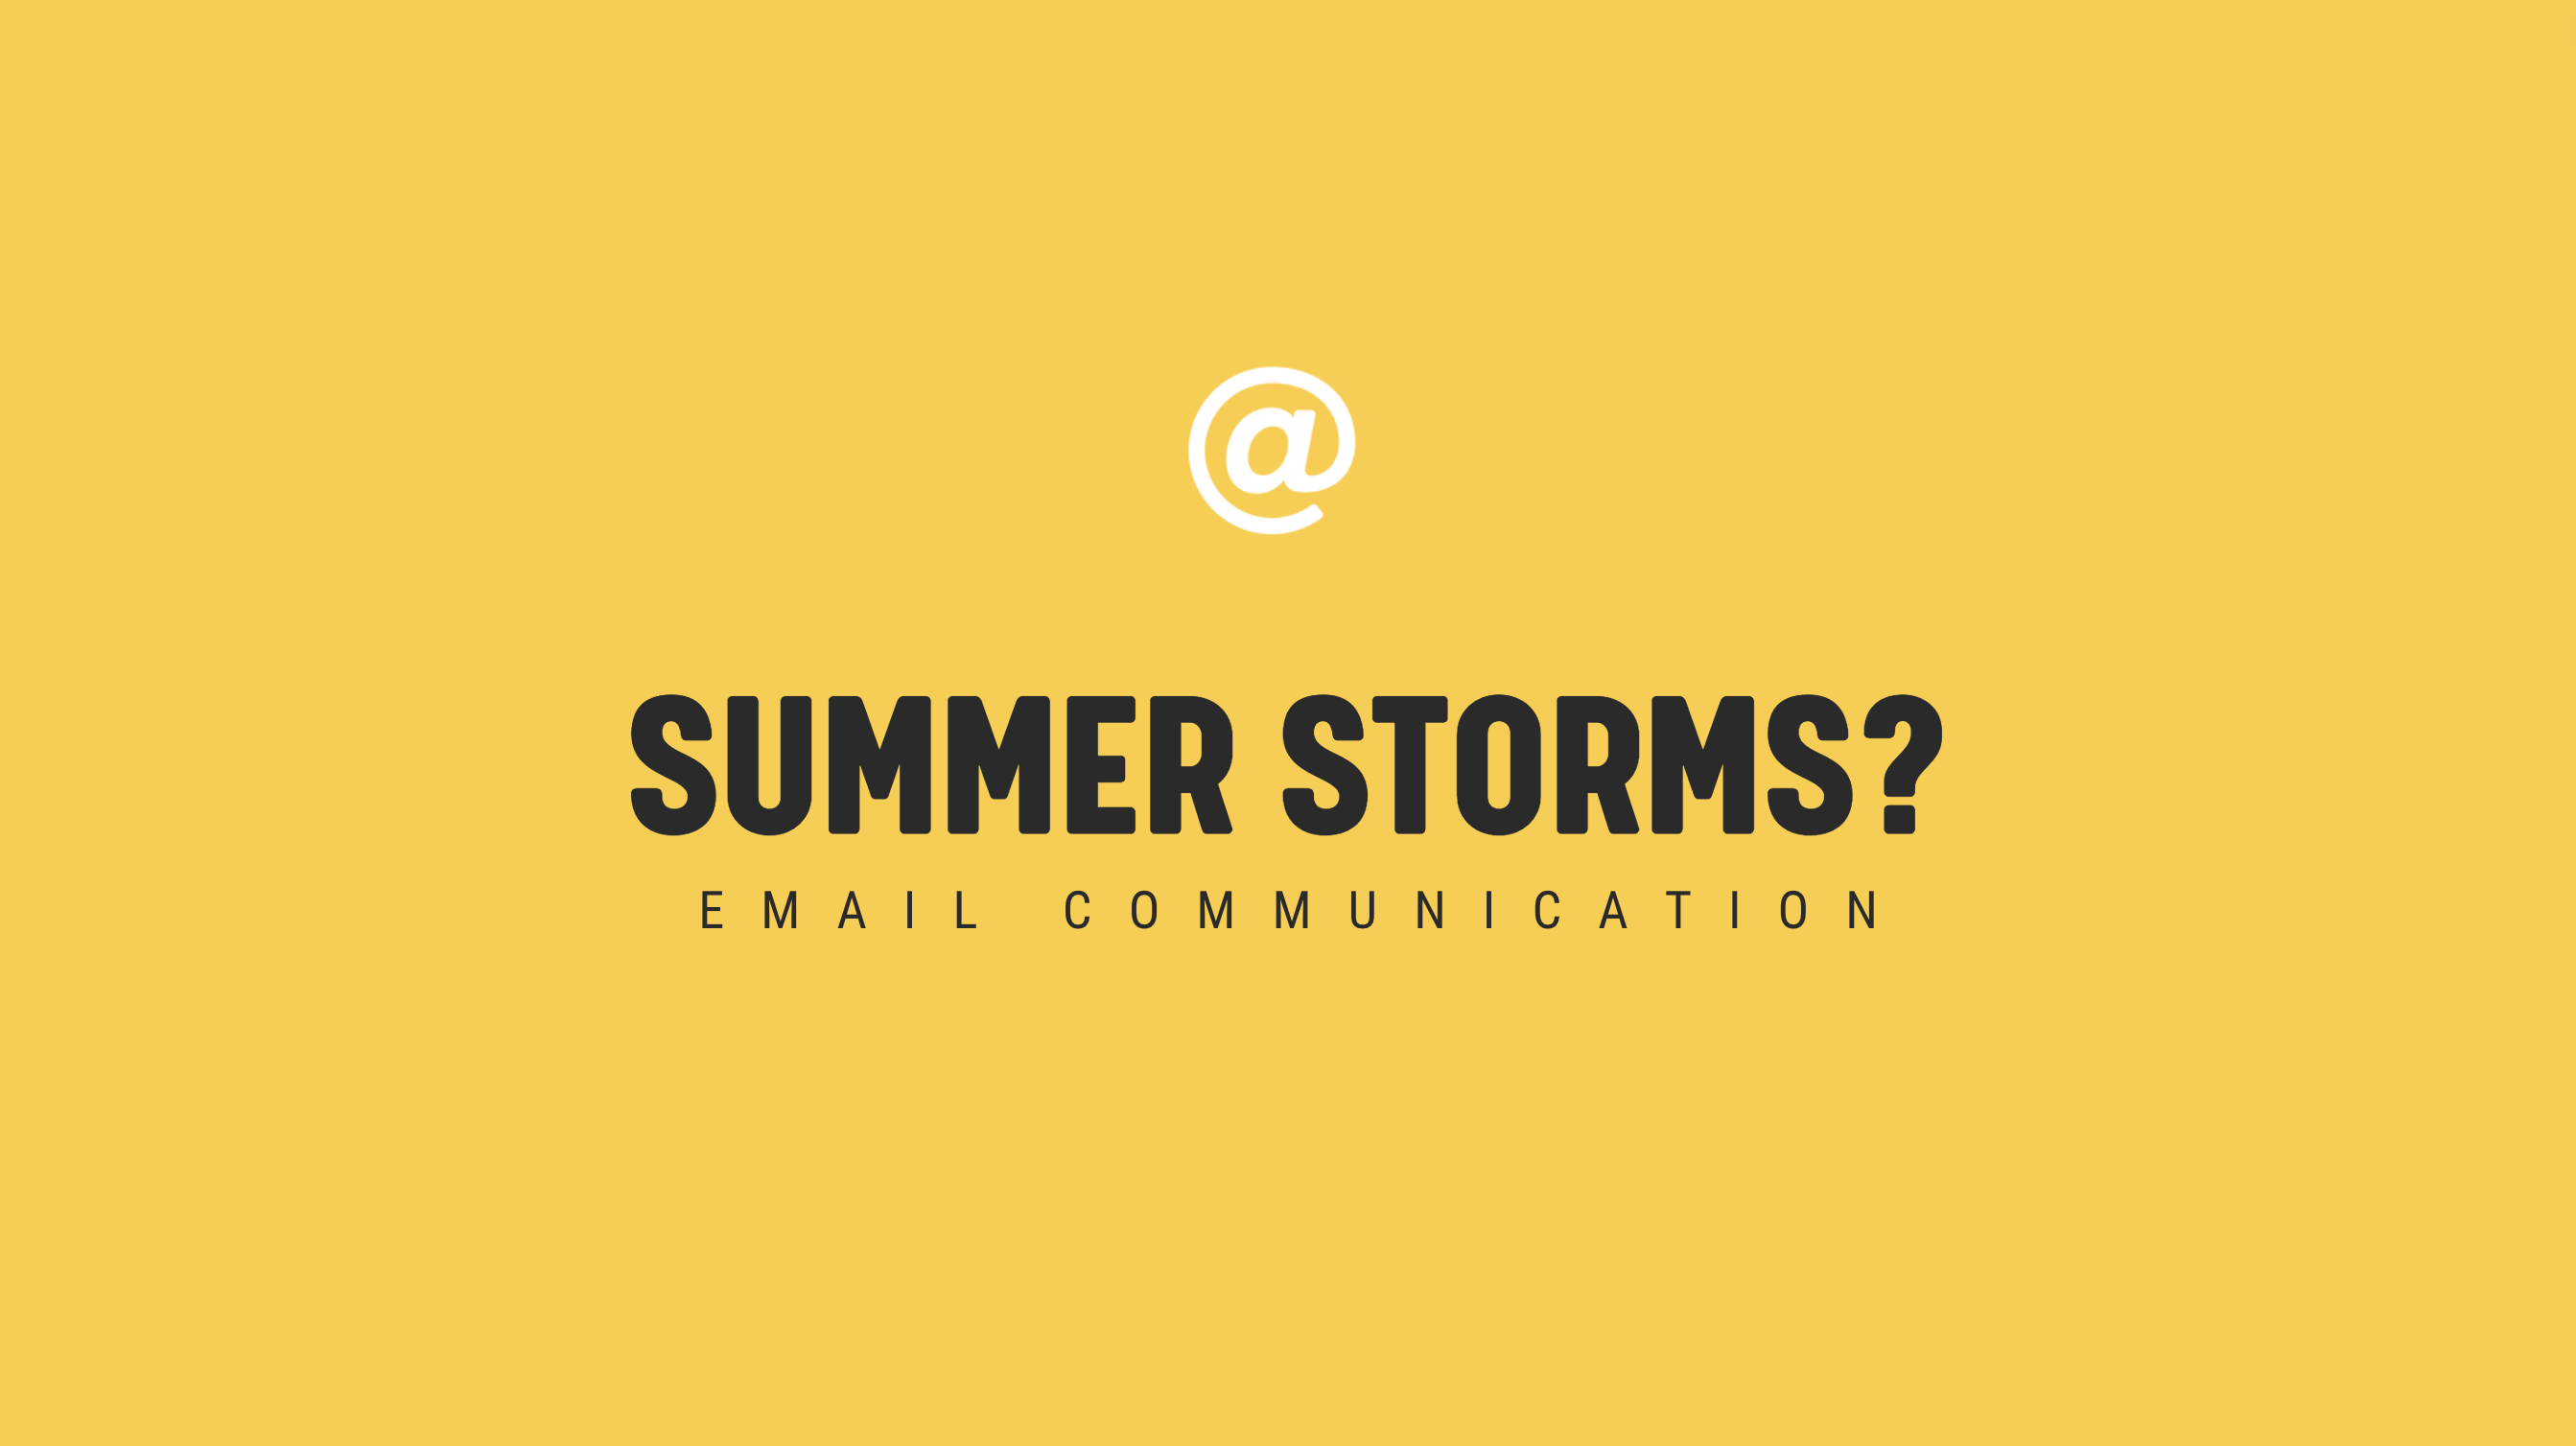 [NEW] Summer Storms? - Timely Email